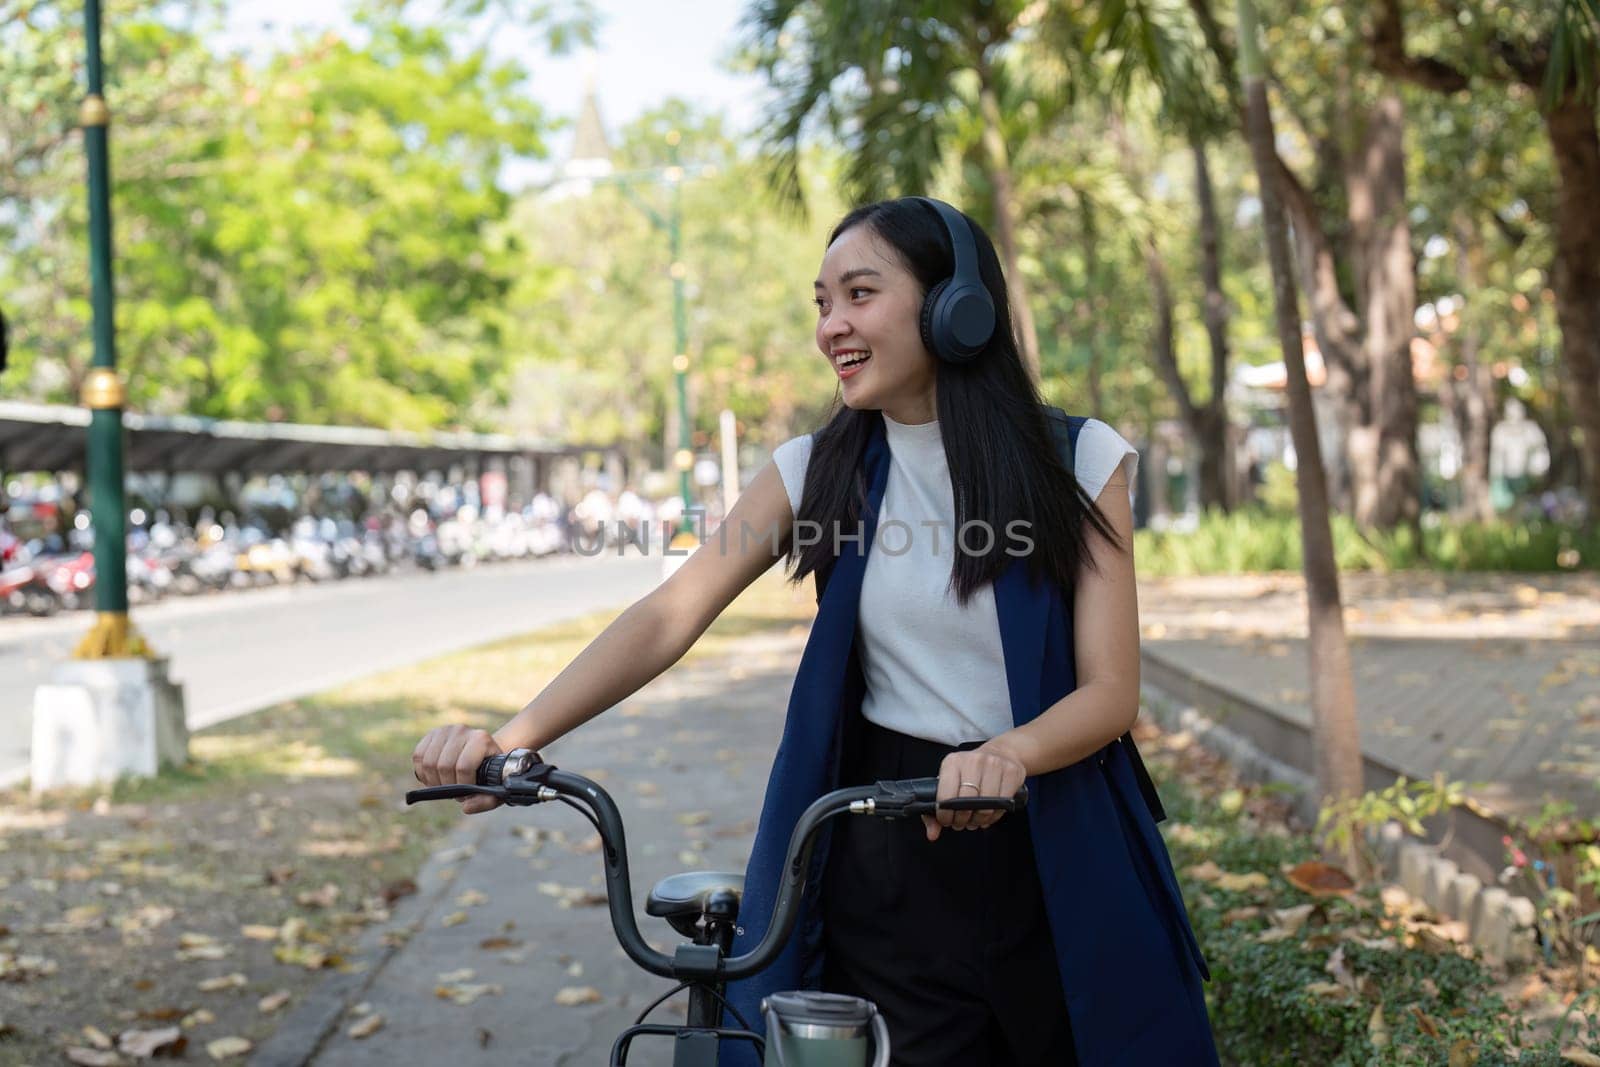 Businesswoman commuting by bicycle with headphones in urban park. Concept of eco friendly transport, active lifestyle, and outdoor fitness.